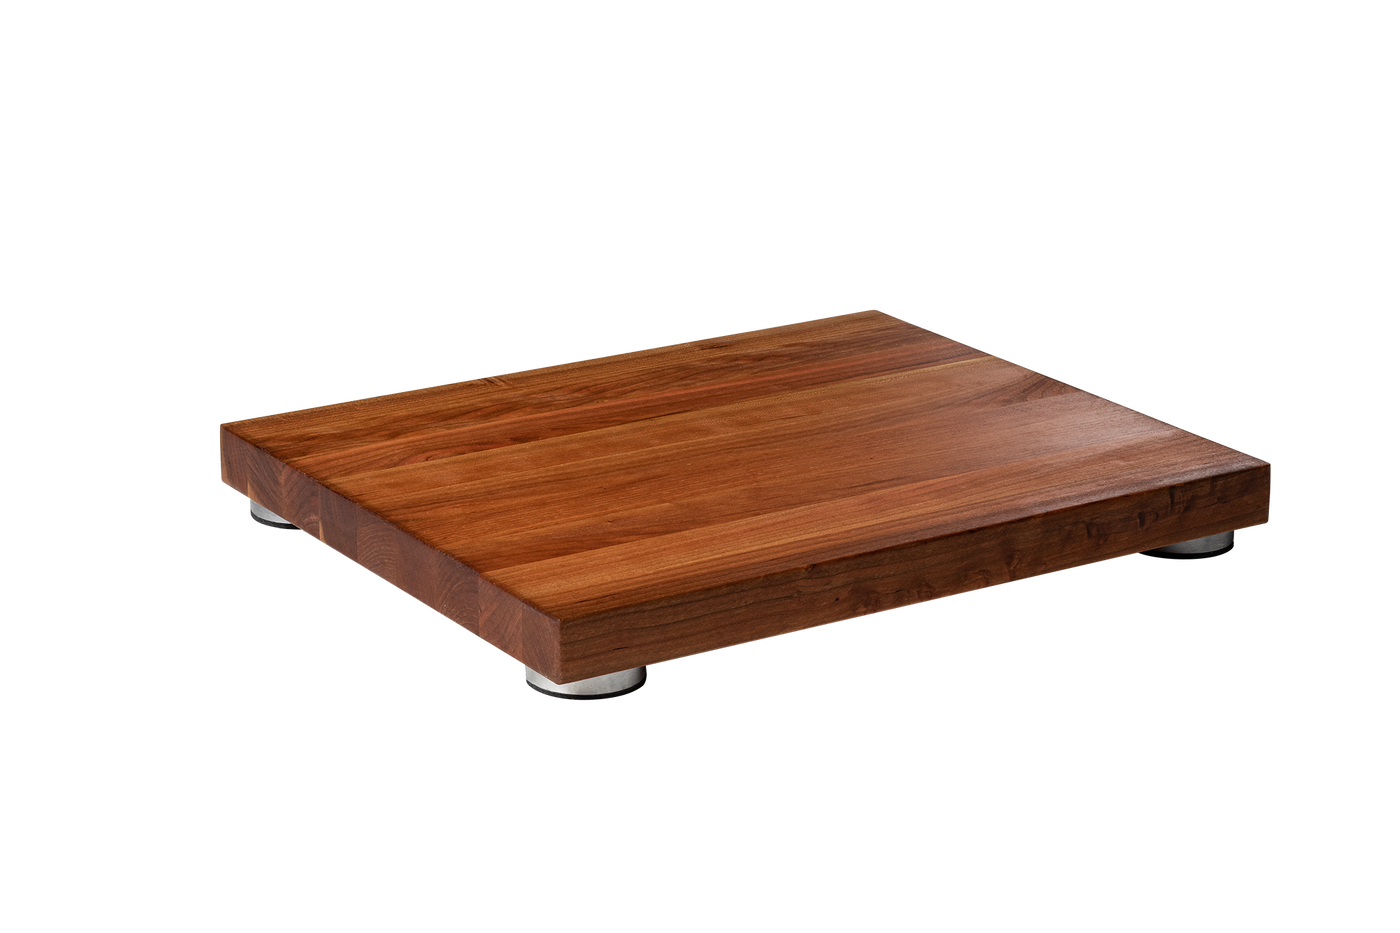 Cutting Board with Brushed Aluminium Stabilizers. 19'' Length, 1-1/2'' Height. (Flat Grain)